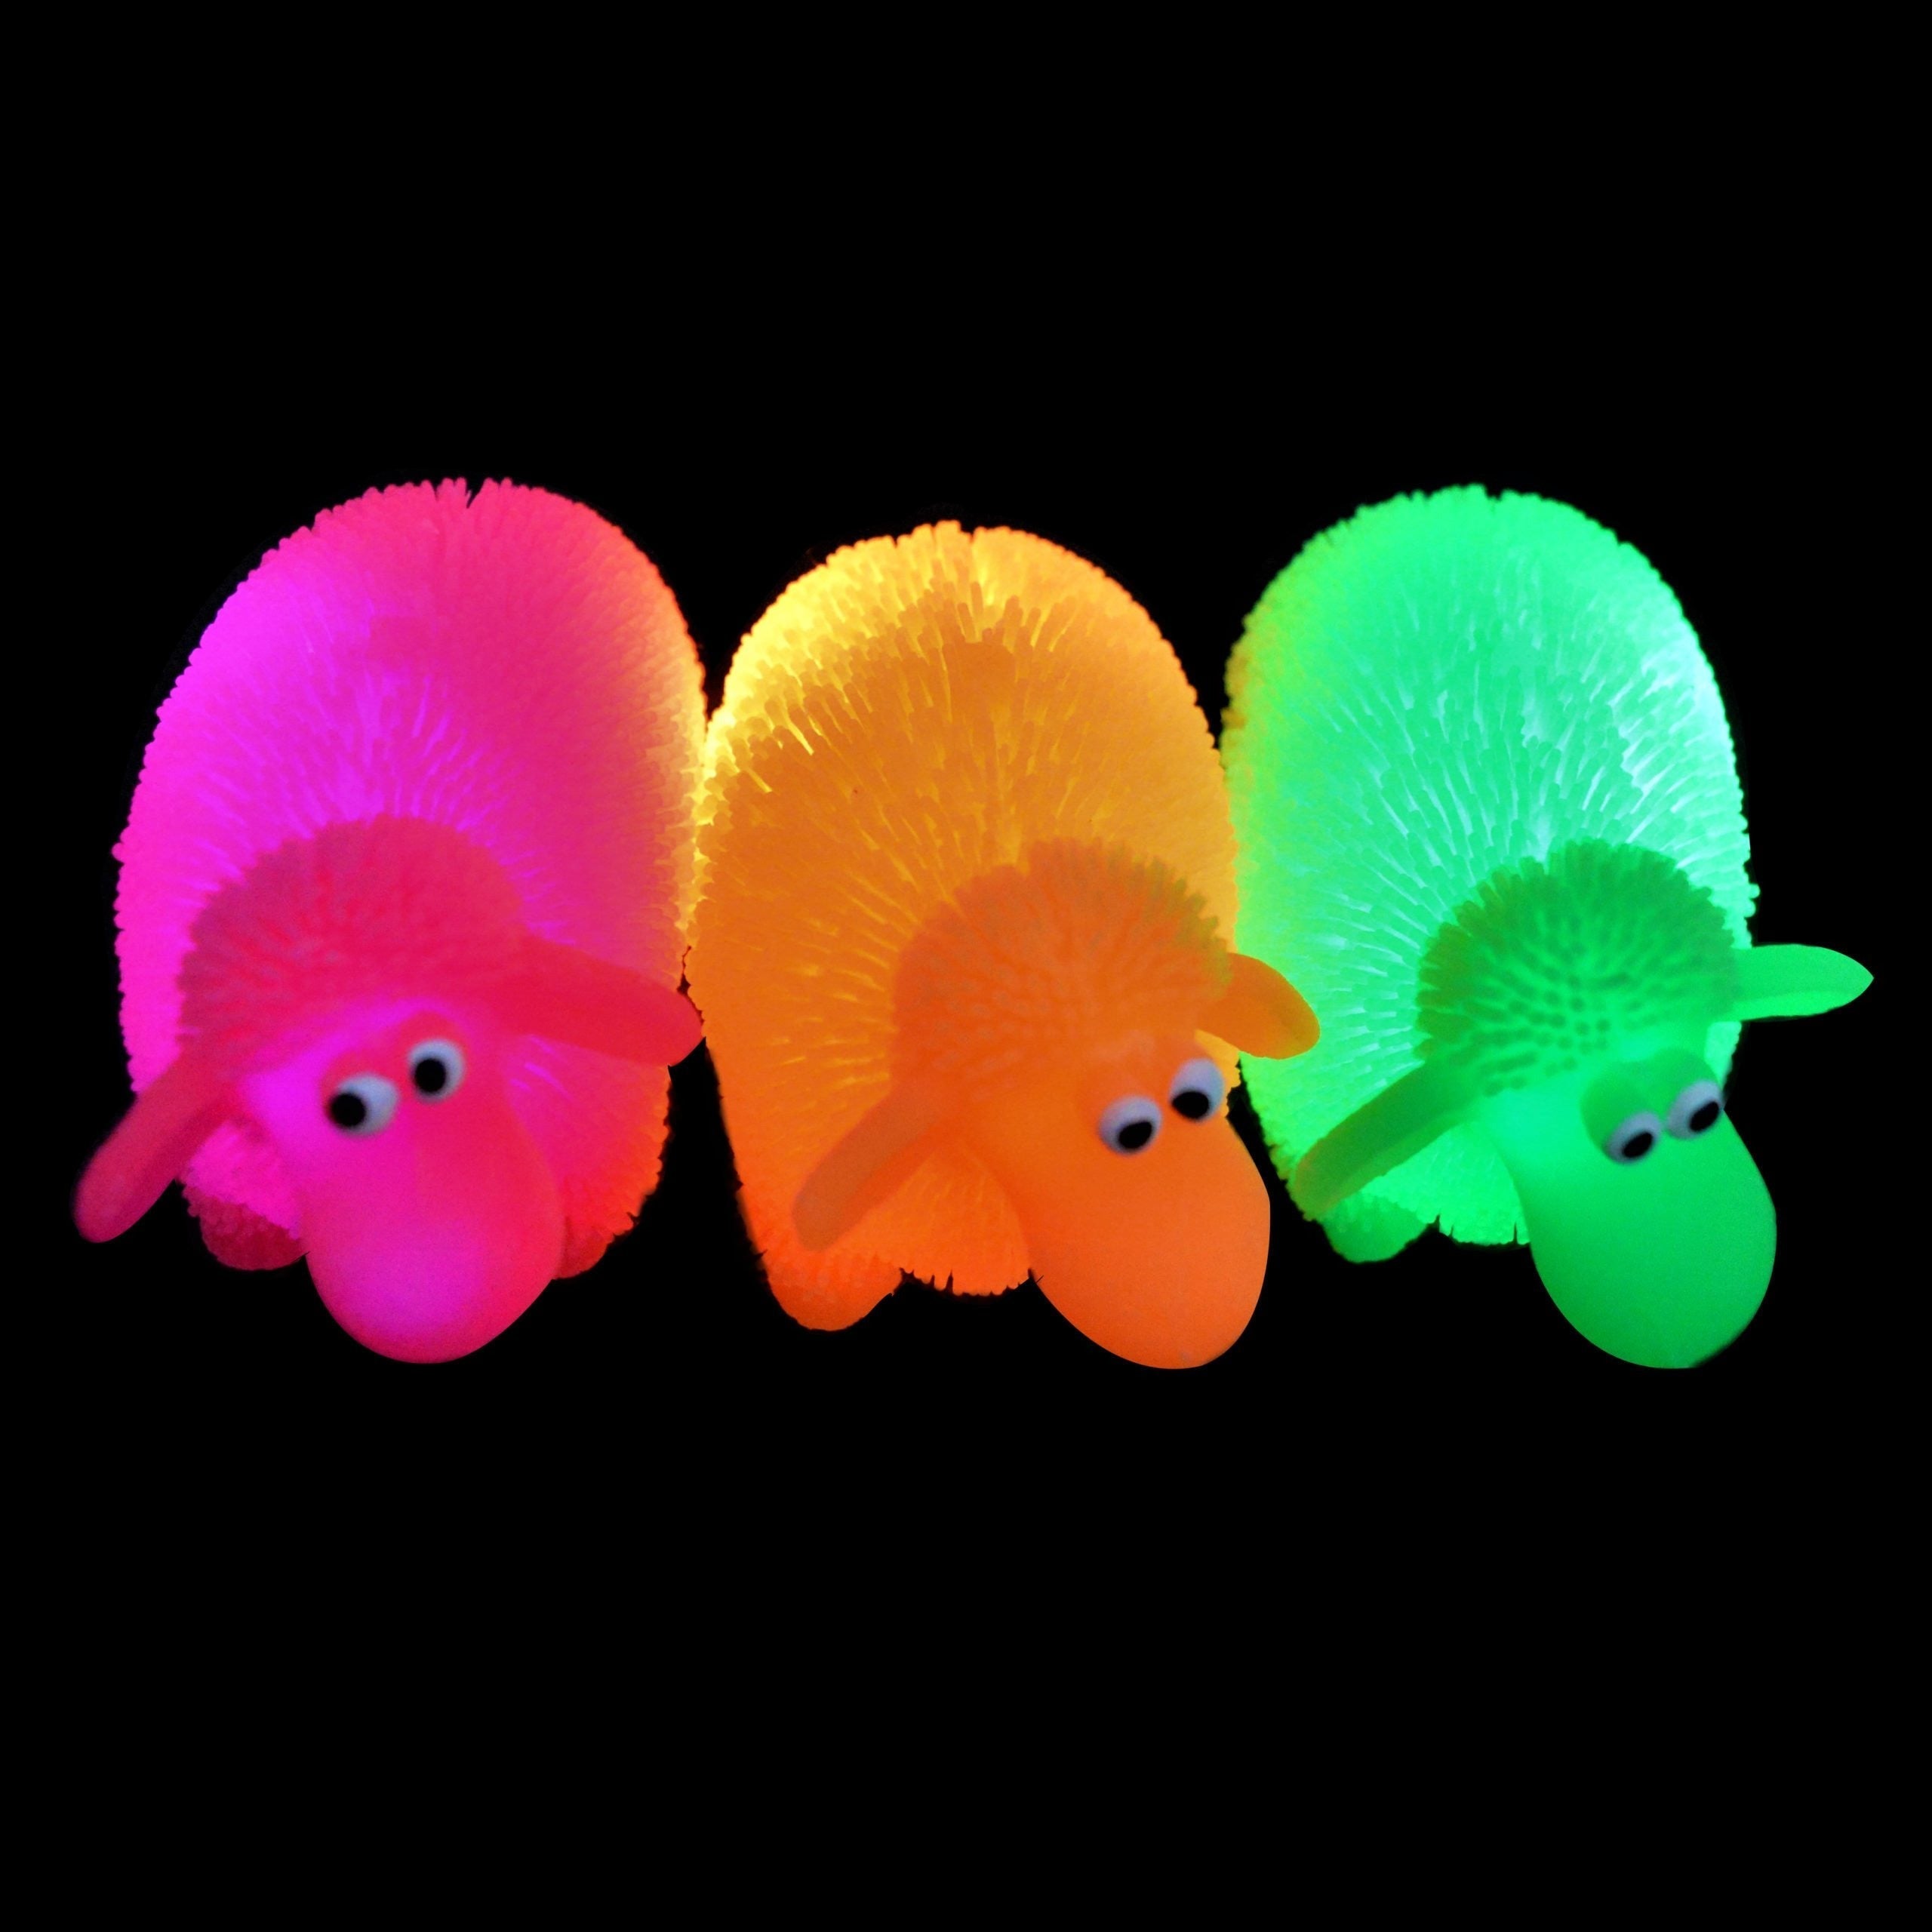 Flashing Sheep Puffer Toy, Air-filled puffer sheep toy with light-up flashing insides. Knock the Flashing Sheep Puffer Toy against a surface and it will start flashing from the inside, with the colourful lights causing his body to glow. Its body is covered with short and stretchy tendrils too, with key features raised to make them stand out. Supplied in an assortment of colours.The Flashing Sheep Puffer Toy is incredibly tactile being and made from a super squishy, soft silicone with little raised bumps for